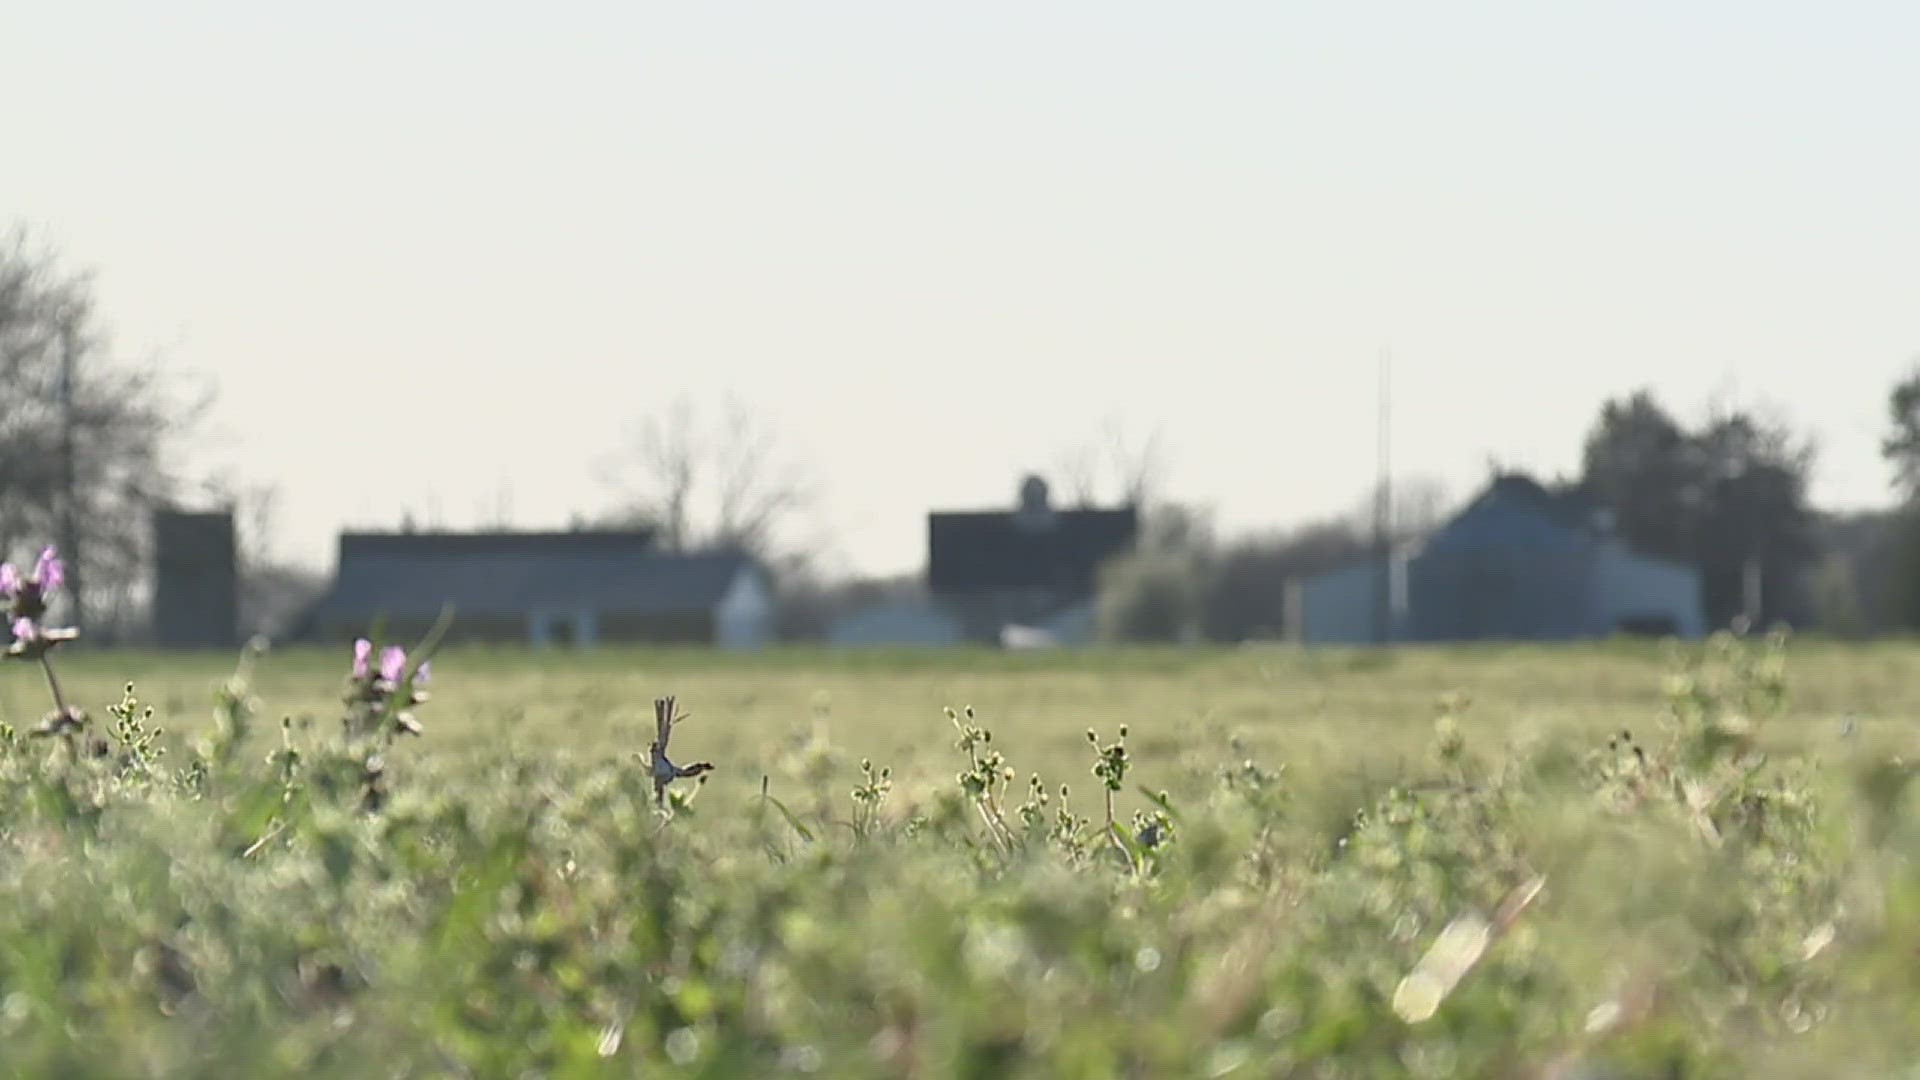 One person was killed in a Davenport crash, and another person was injured in a Kewanee accident. Moline is also moving forward with the solar farm proposal.